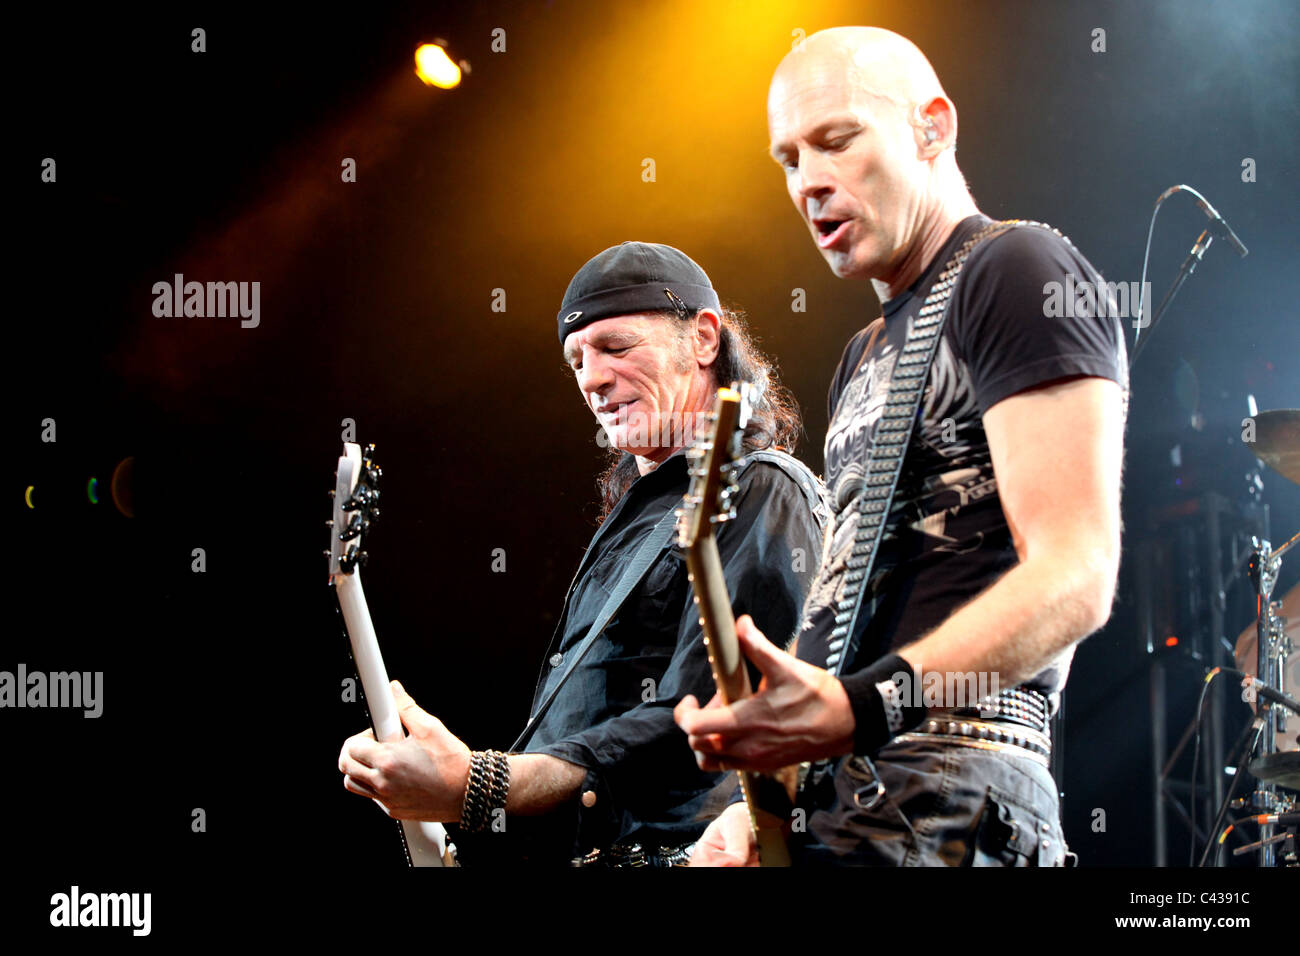 Accept - Concert at Best Buy Theater, New York, April 16, 2011, Mark Tornillo, Herman Frank, Peter Baltes, Wolf Hoffman Stock Photo